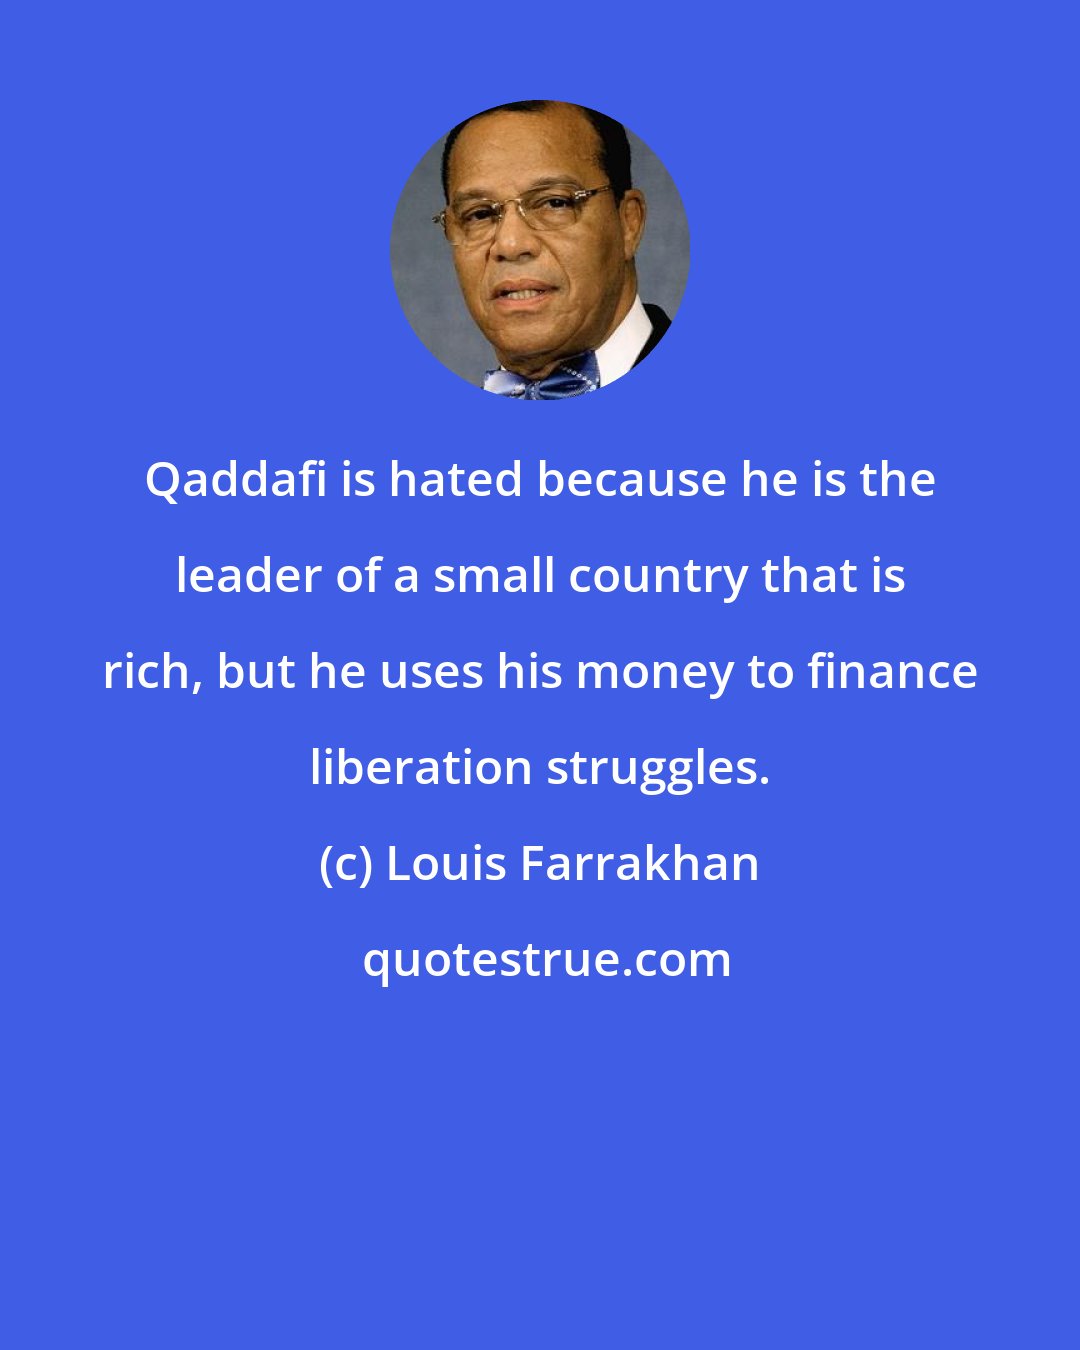 Louis Farrakhan: Qaddafi is hated because he is the leader of a small country that is rich, but he uses his money to finance liberation struggles.